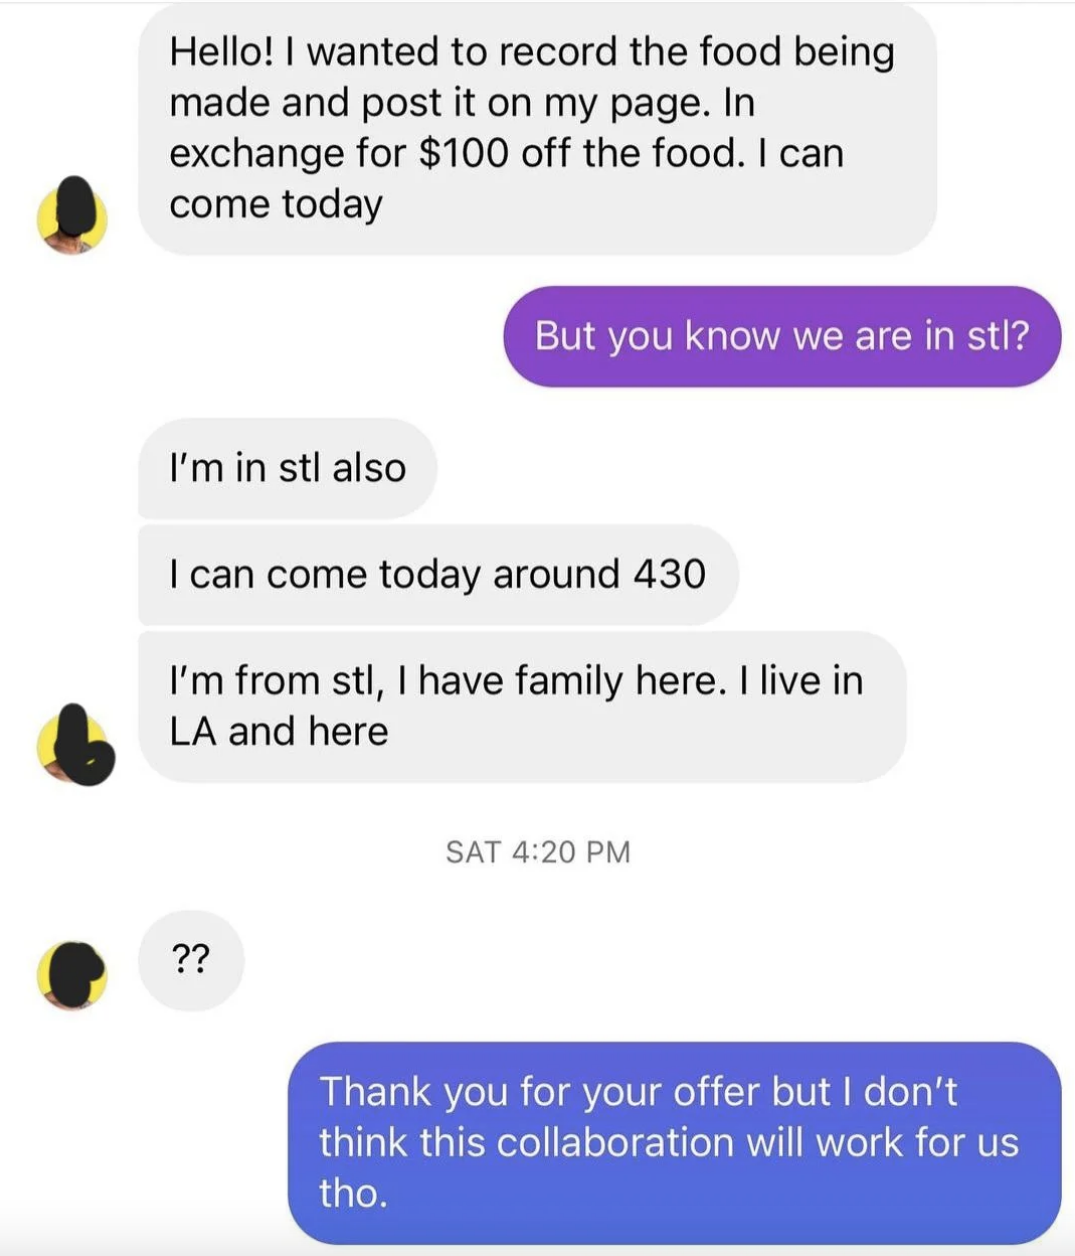 The influencer asks to get $100 off their order and they&#x27;ll take video of the food being made and post it to their Instagram page